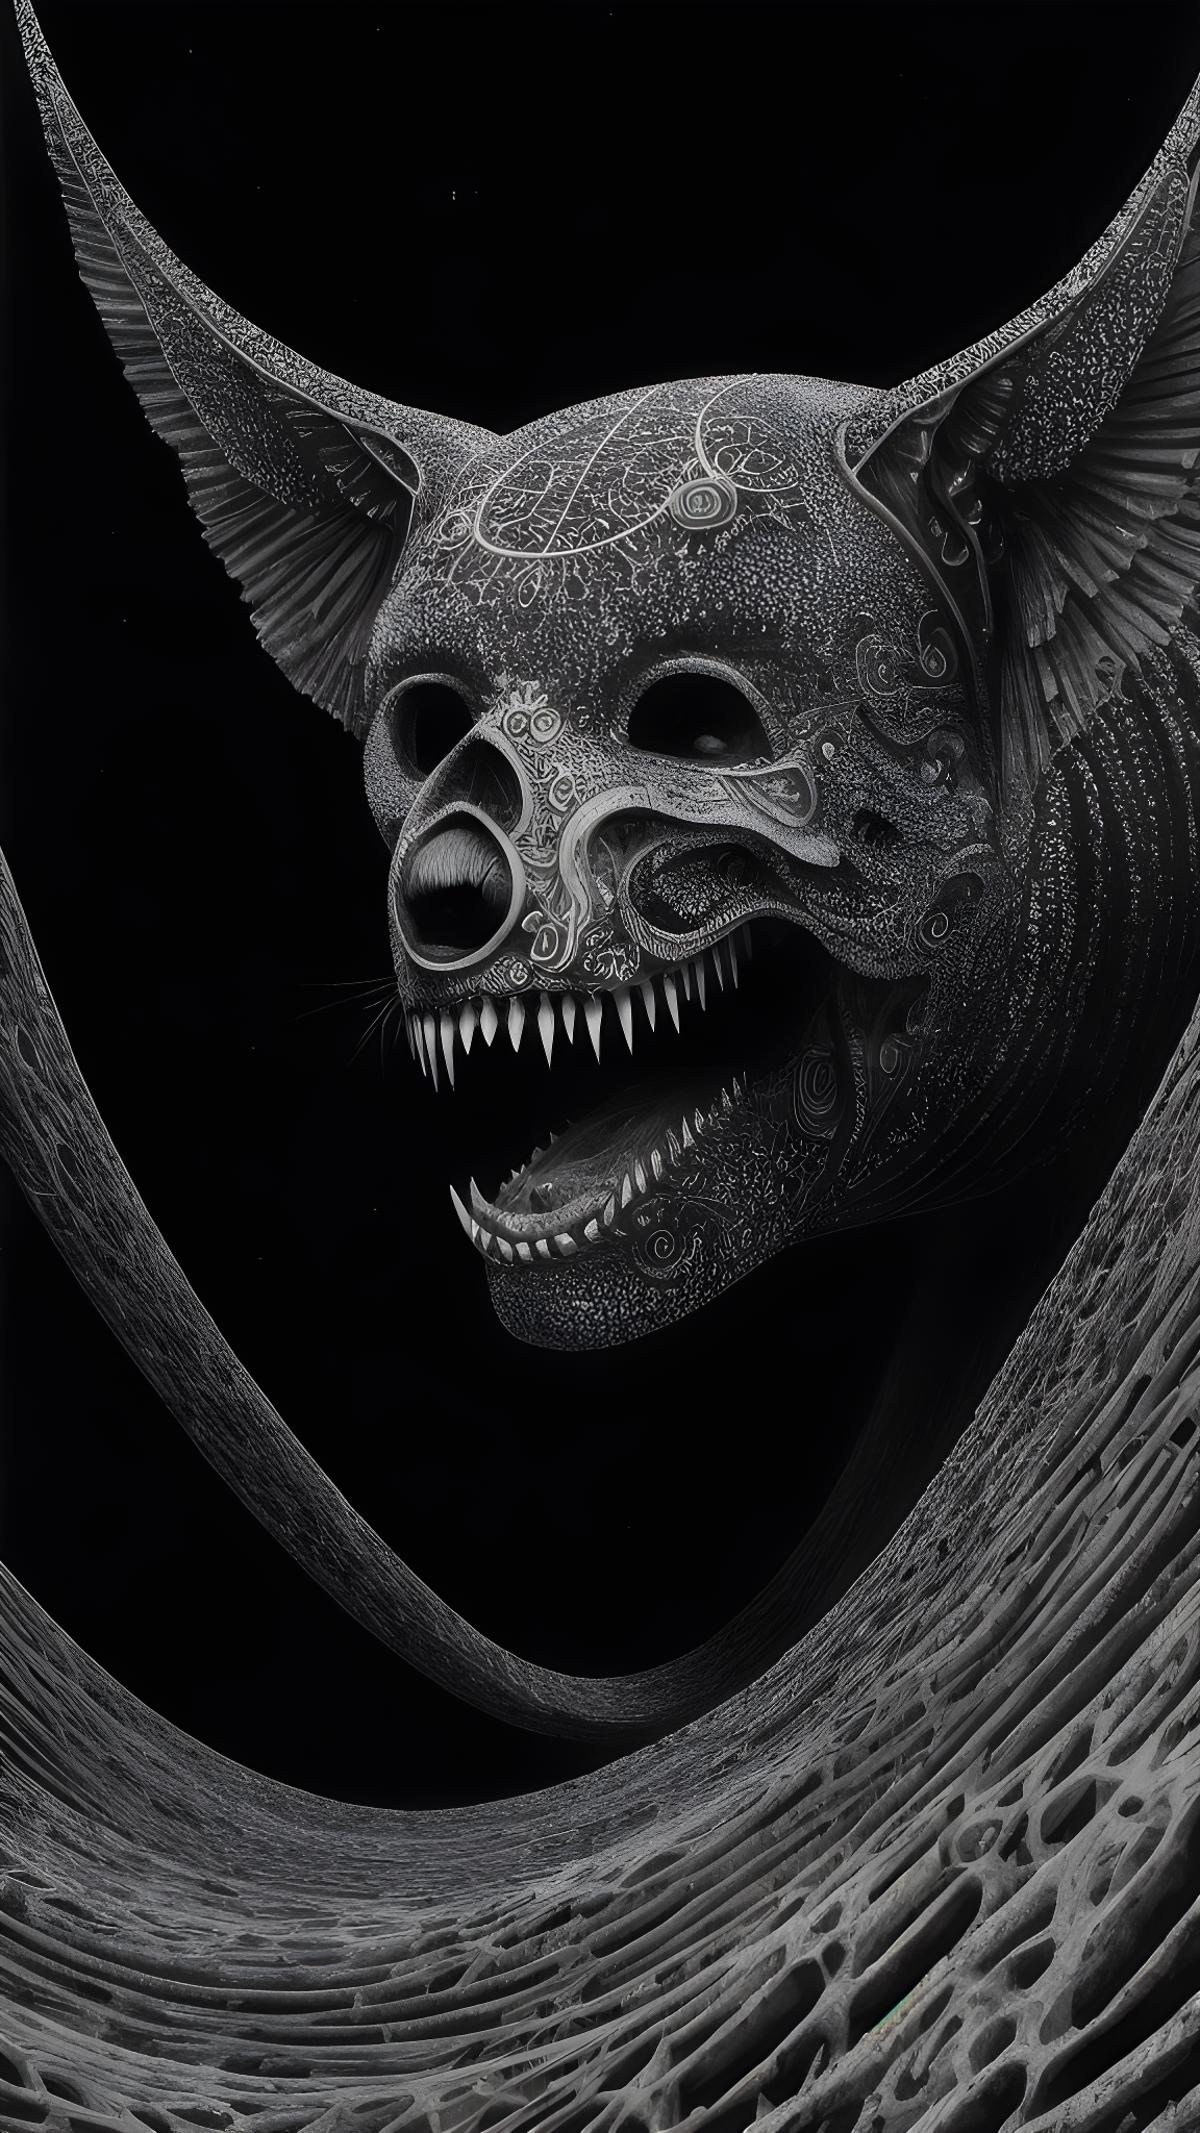 A Dark and Artistic Drawing of a Bear's Head with a Skull Face